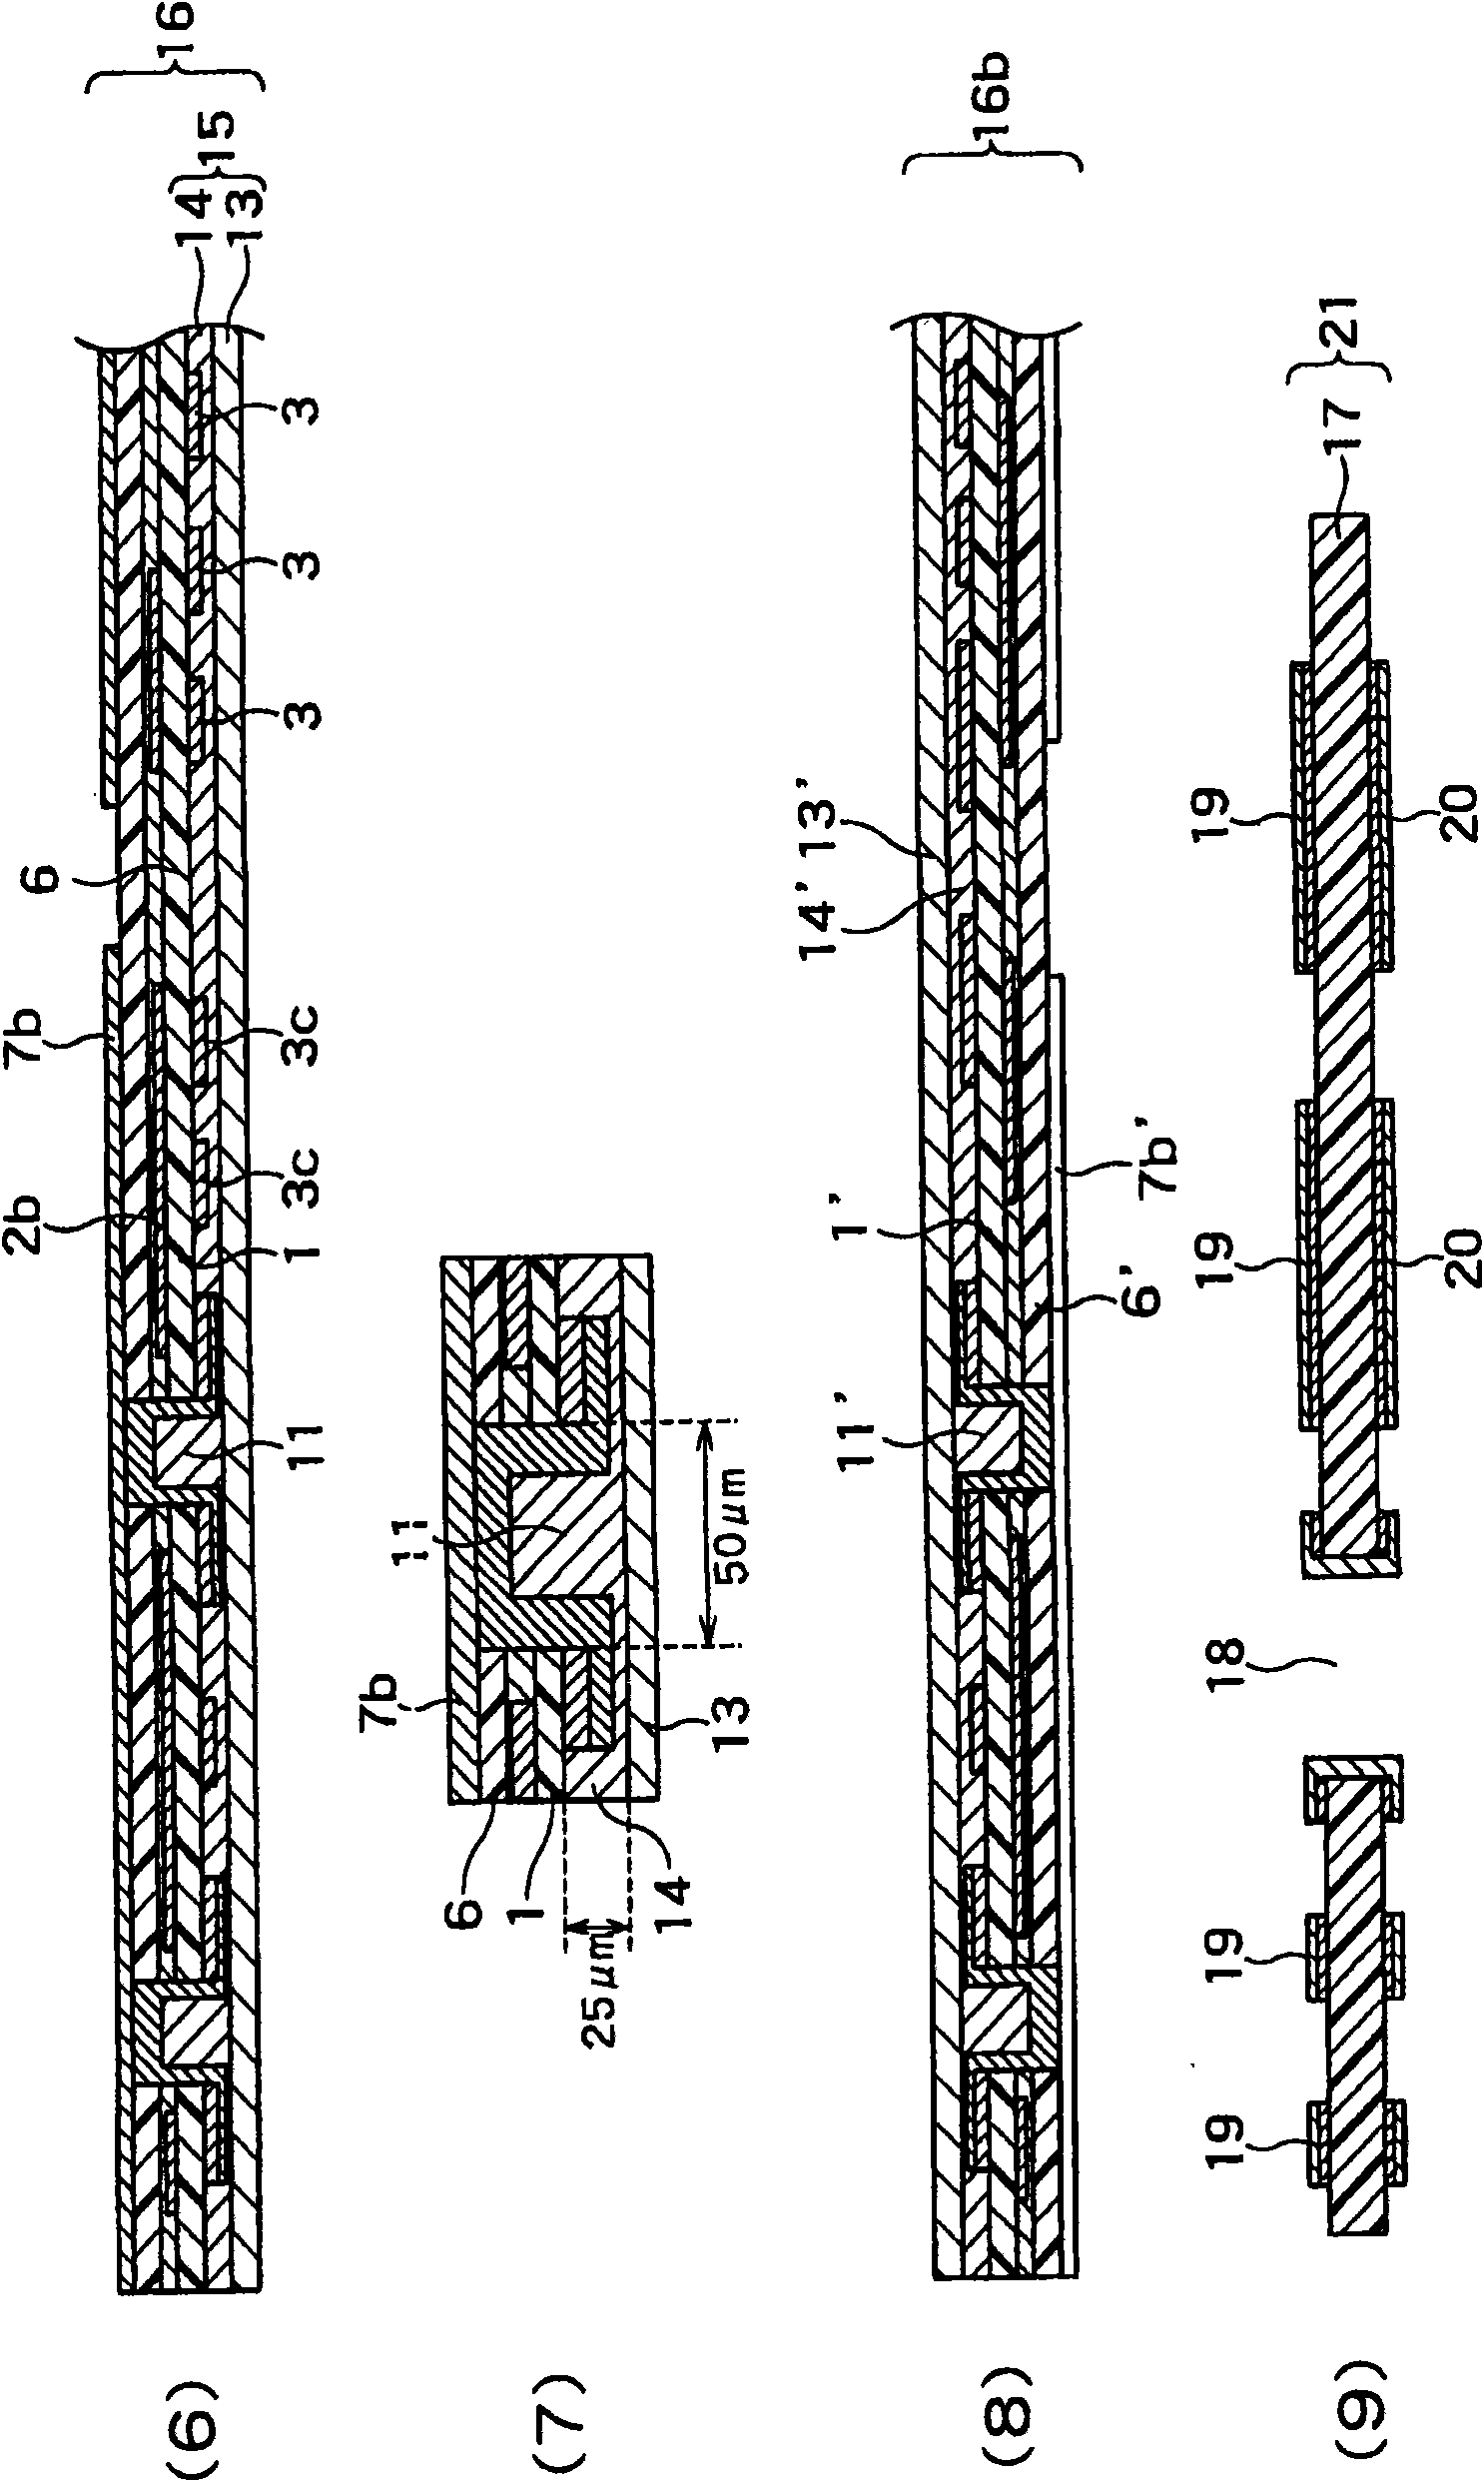 Multi-layer flexible printed circuit board and method of manufacturing the same